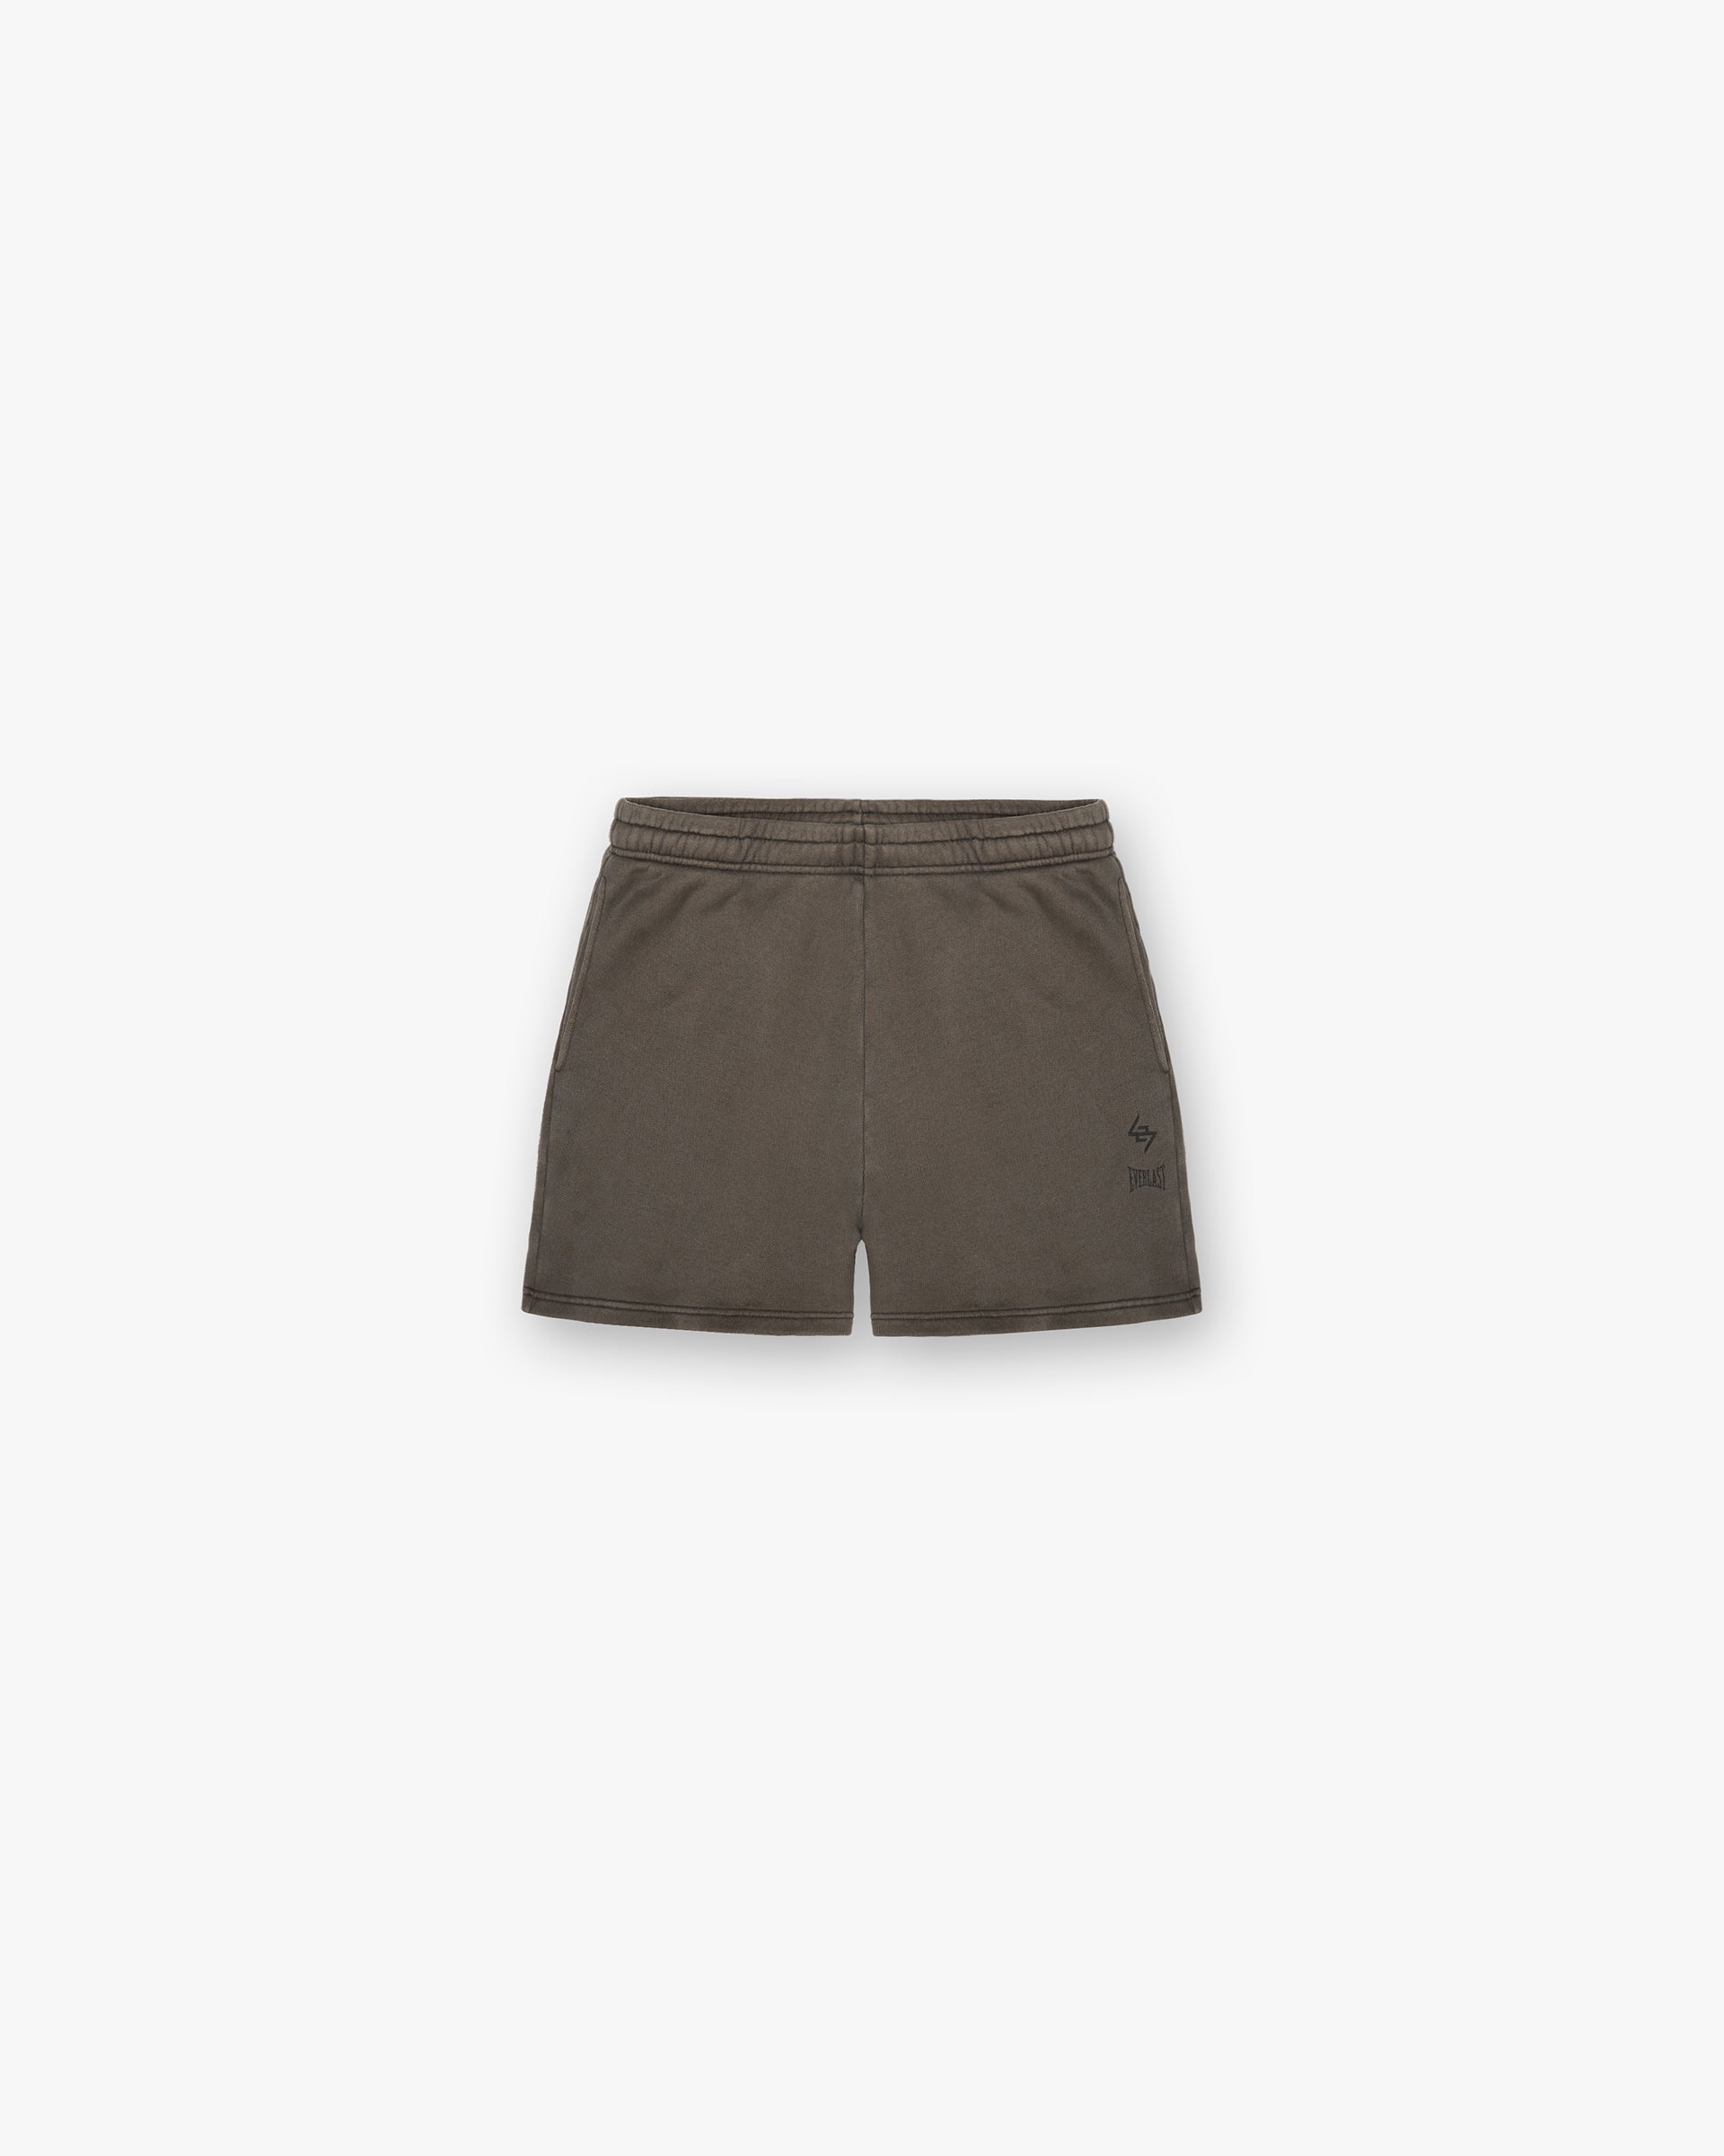 247 X Everlast Training Camp Jersey Shorts - Washed Brown